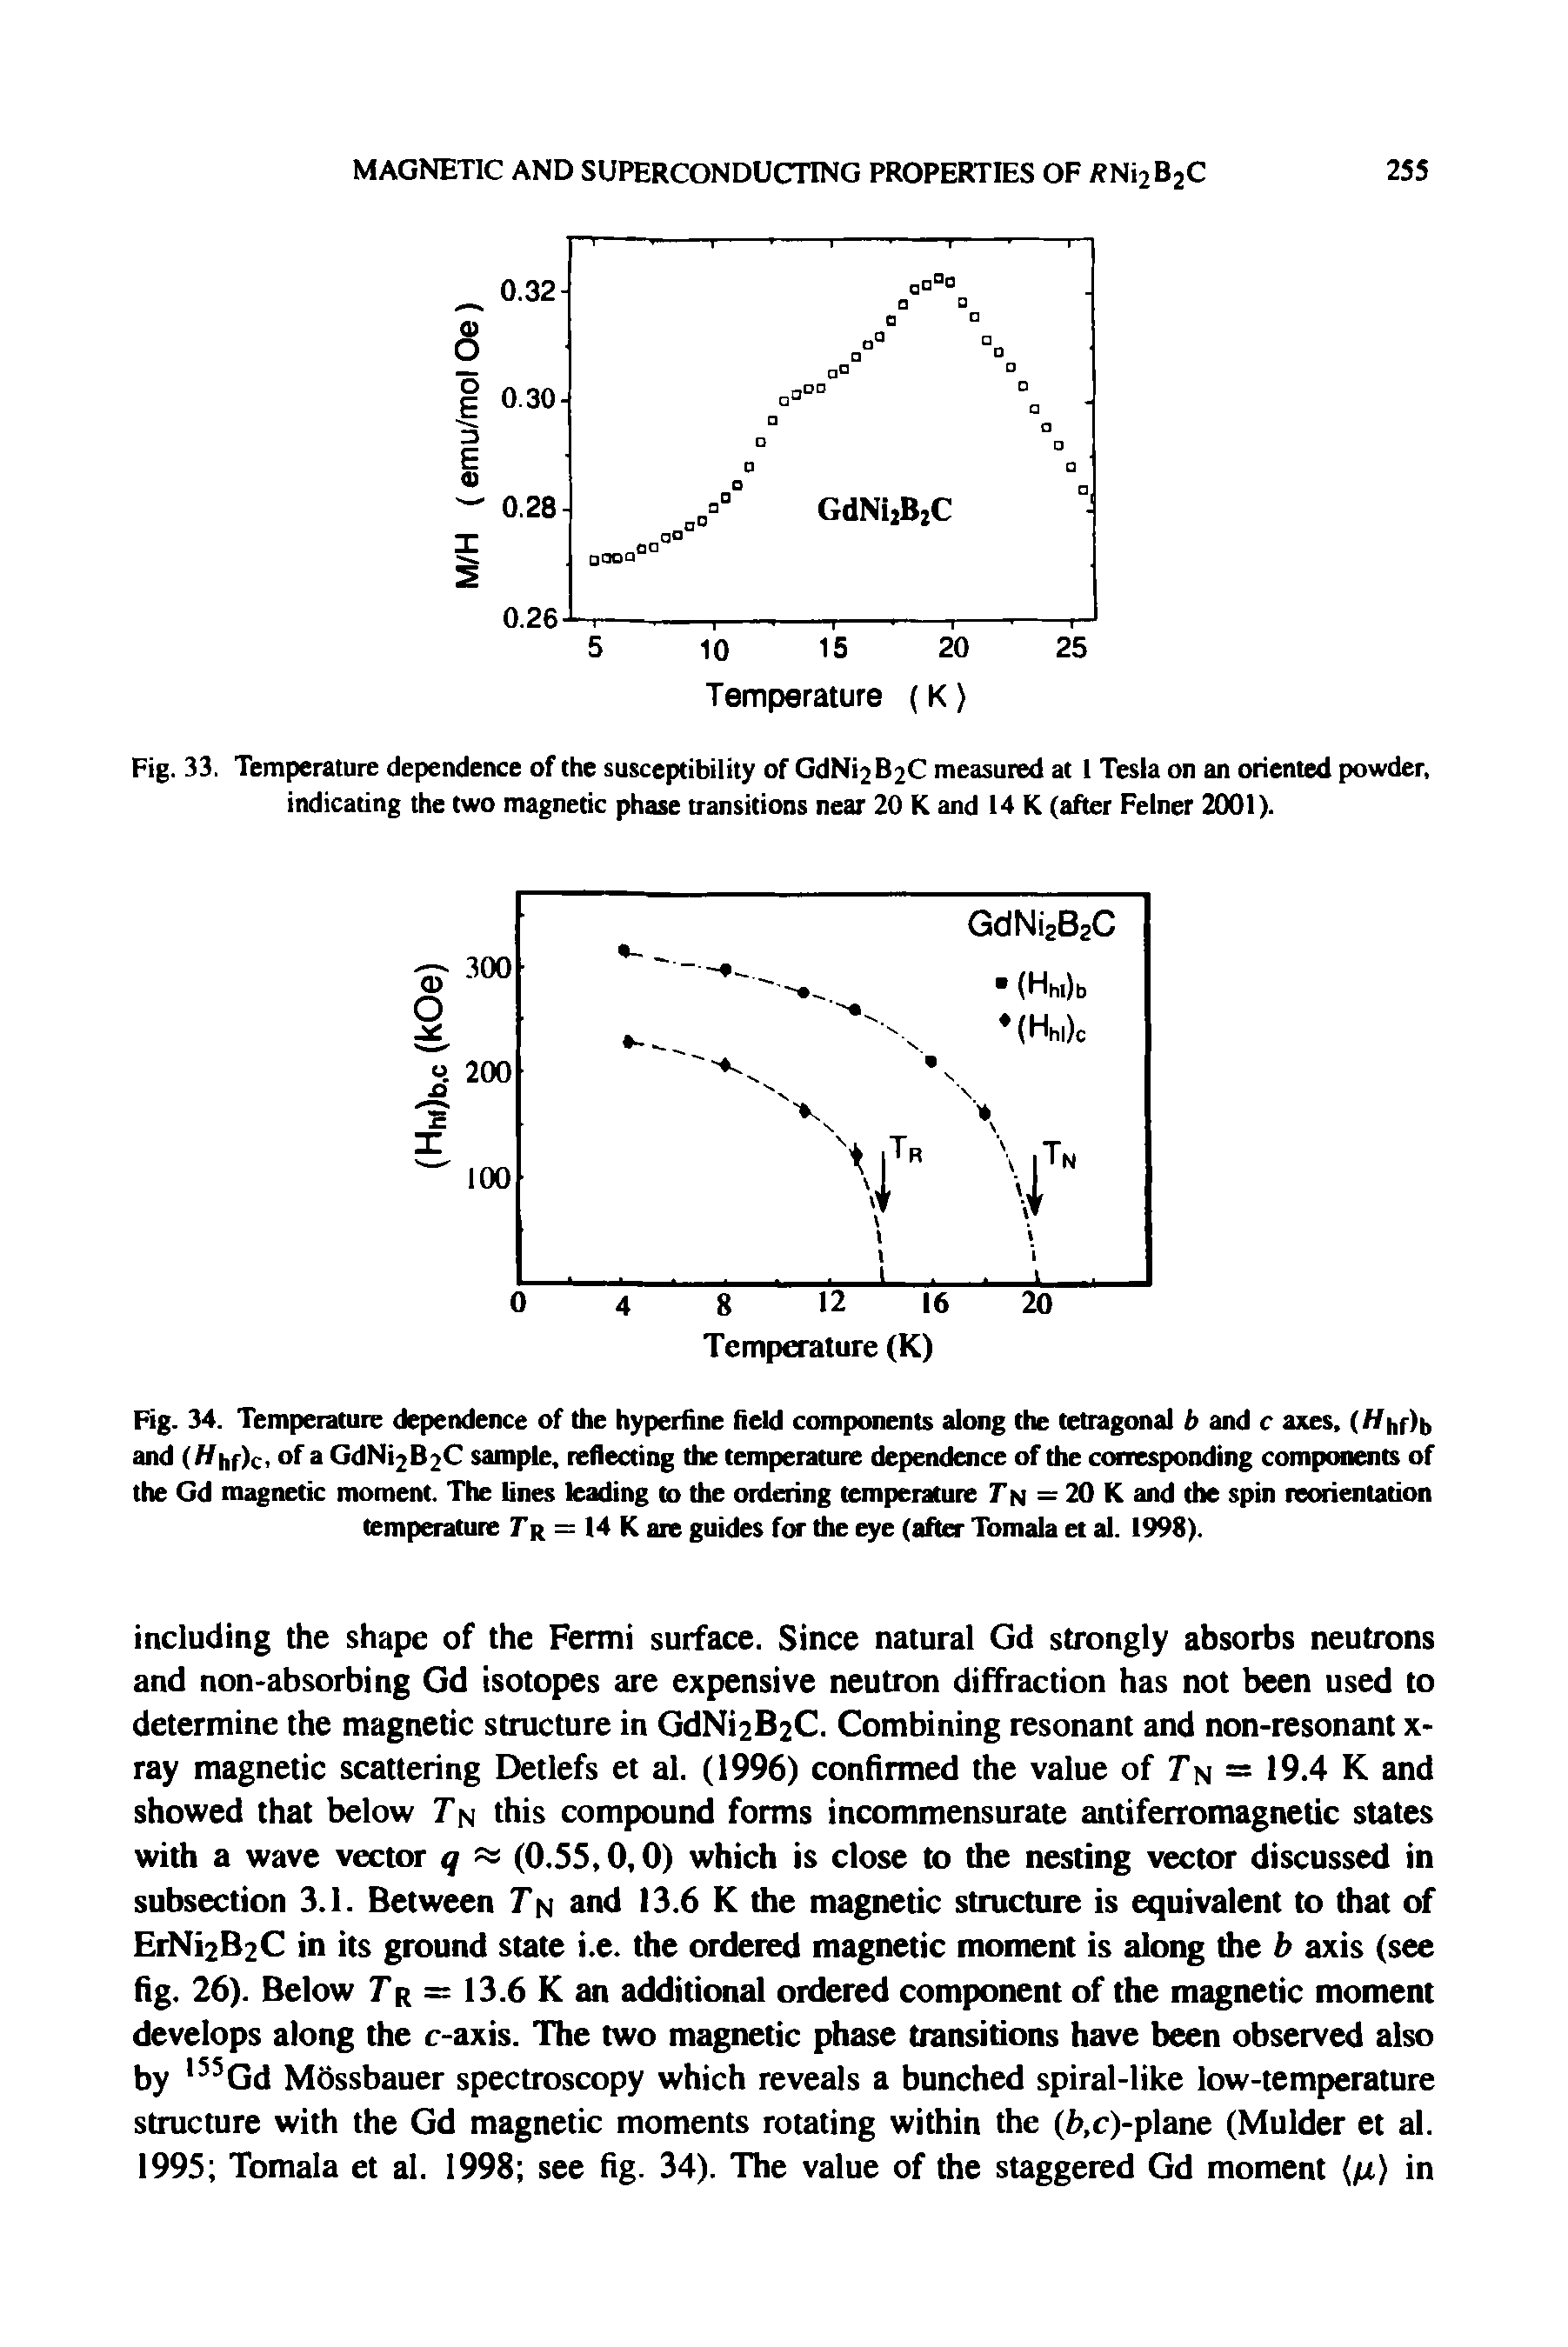 Fig. 33. Temperature dependence of the susceptibility of GdNi2B2C measured at 1 Tesla on an oriented powder, indicating the two magnetic phase transitions near 20 K and 14 K (after Felner 2001).